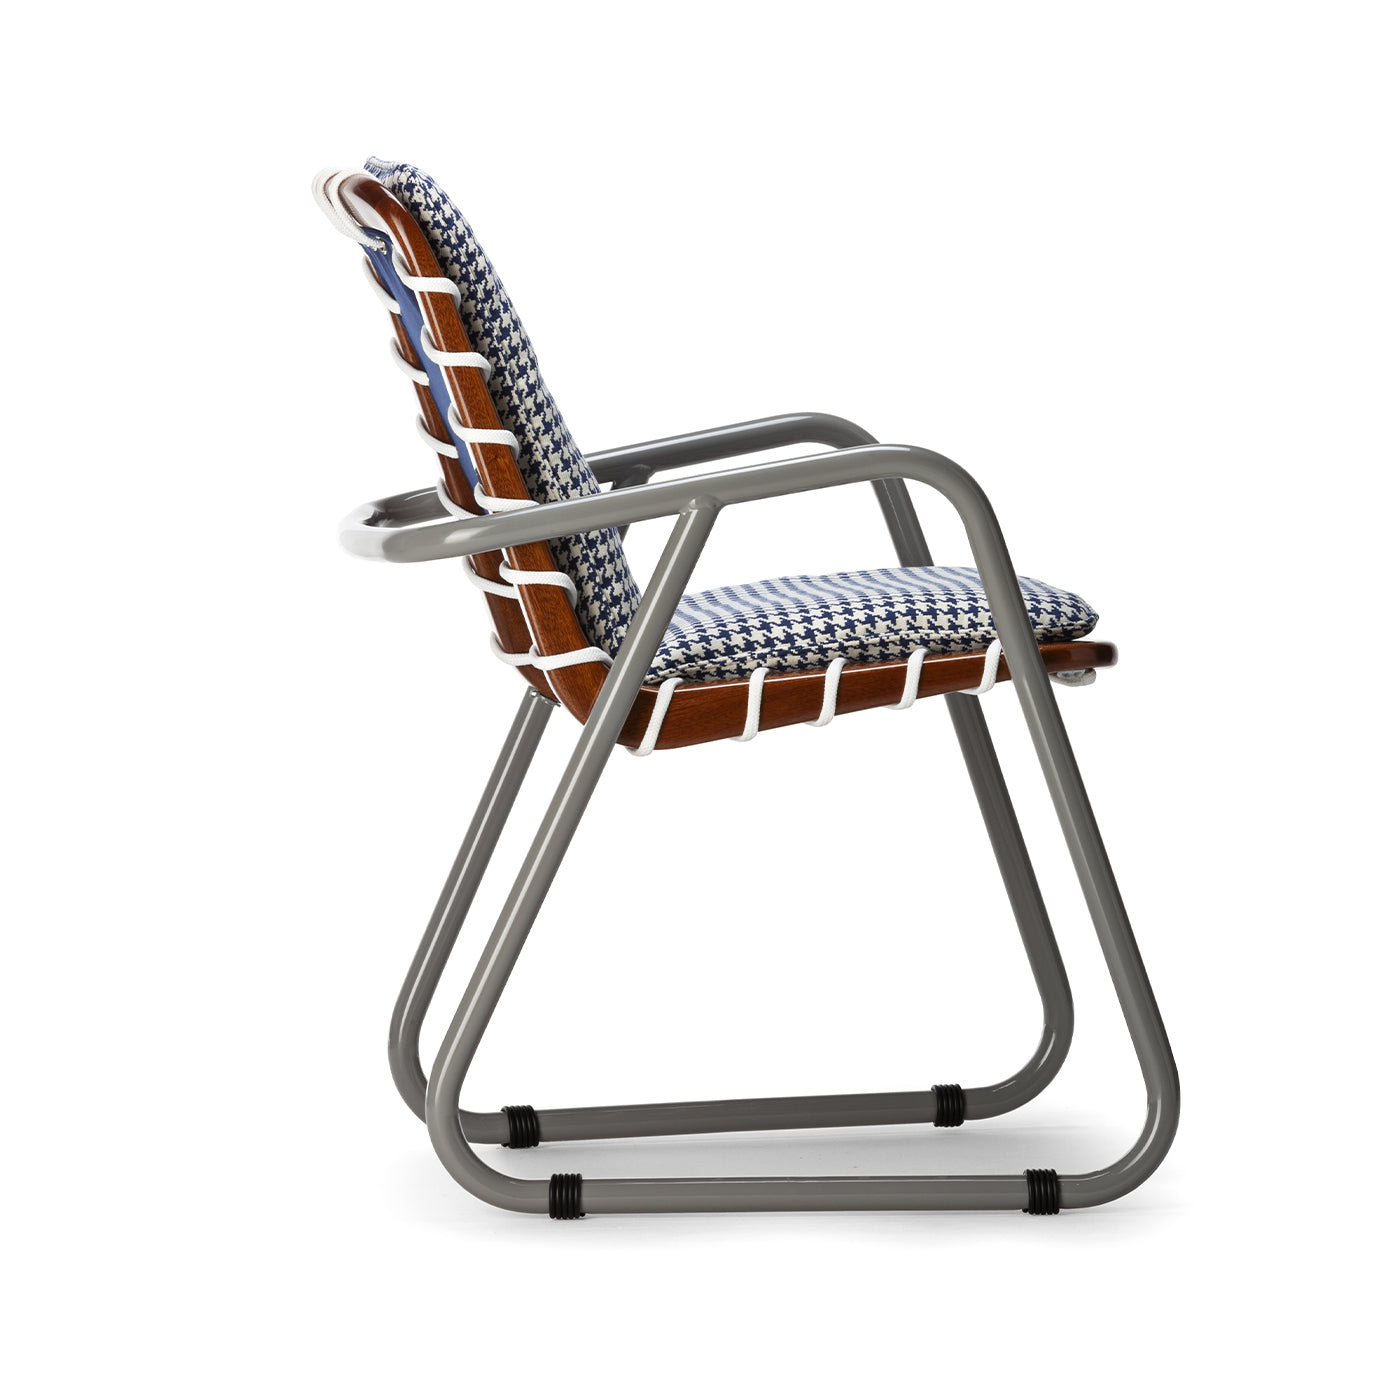 Sunset Dining Chair by Paola Navone - Alternative view 2